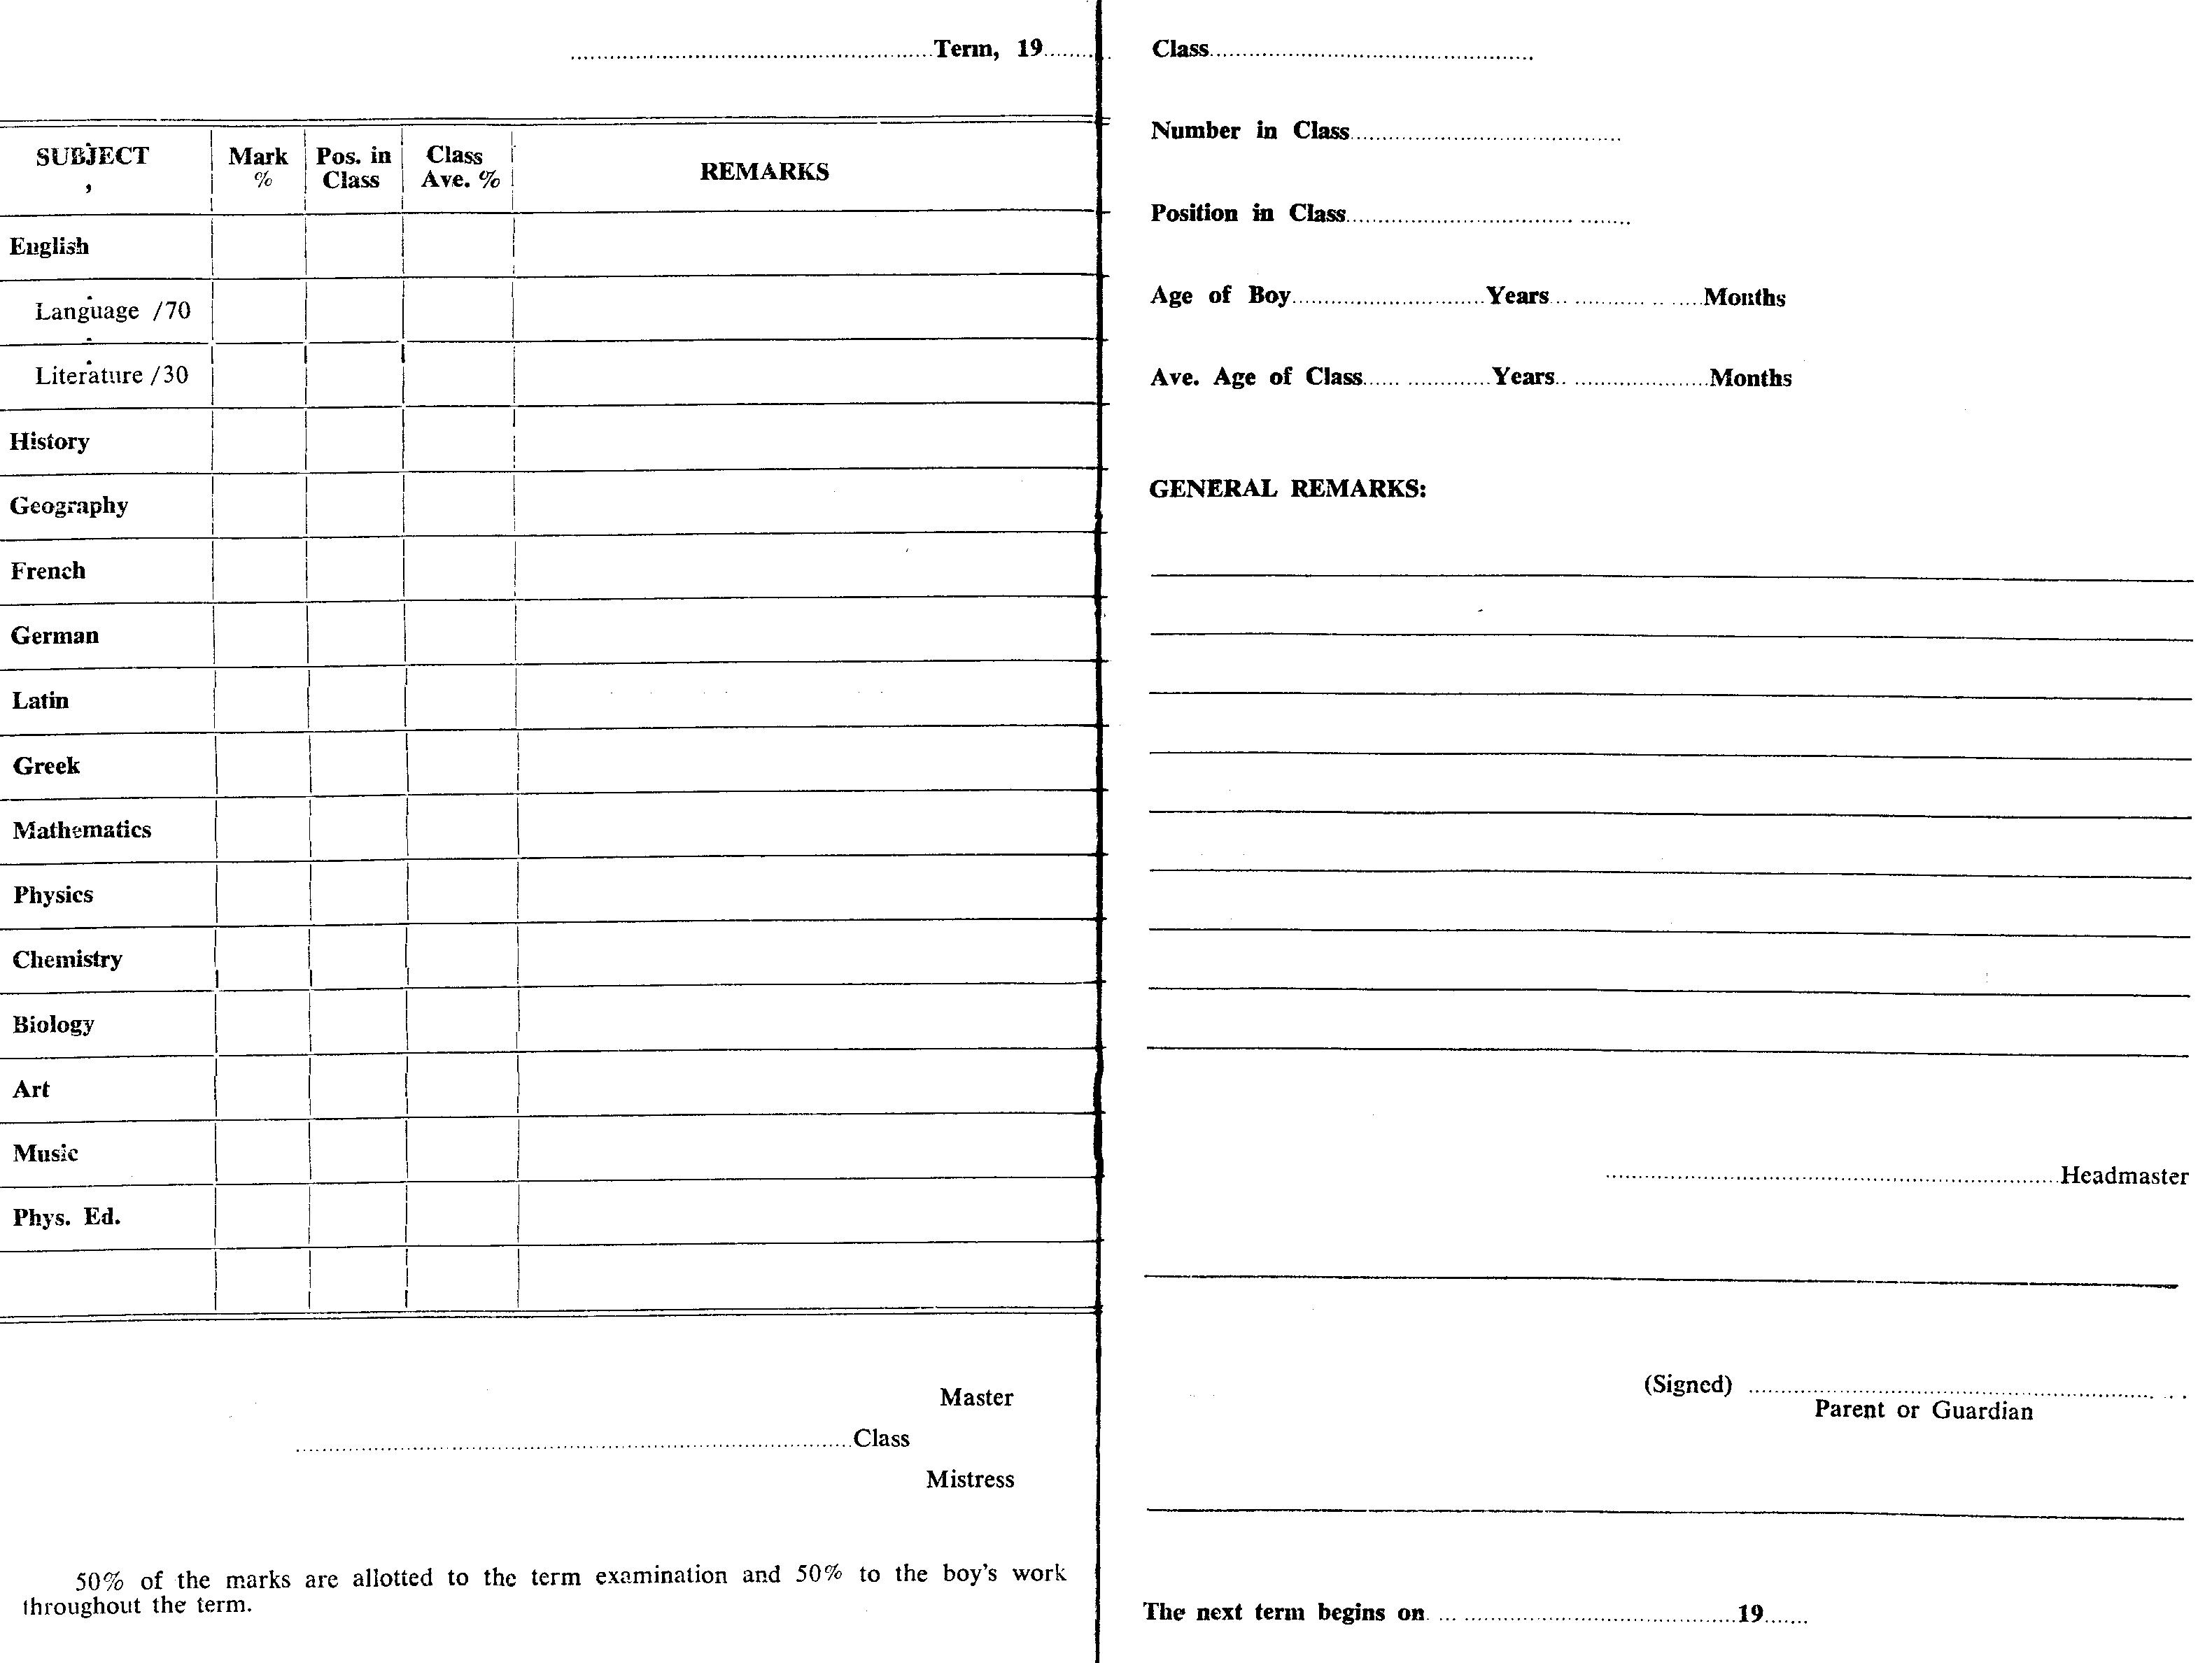 Dartmouth Academy report card blank page 1964